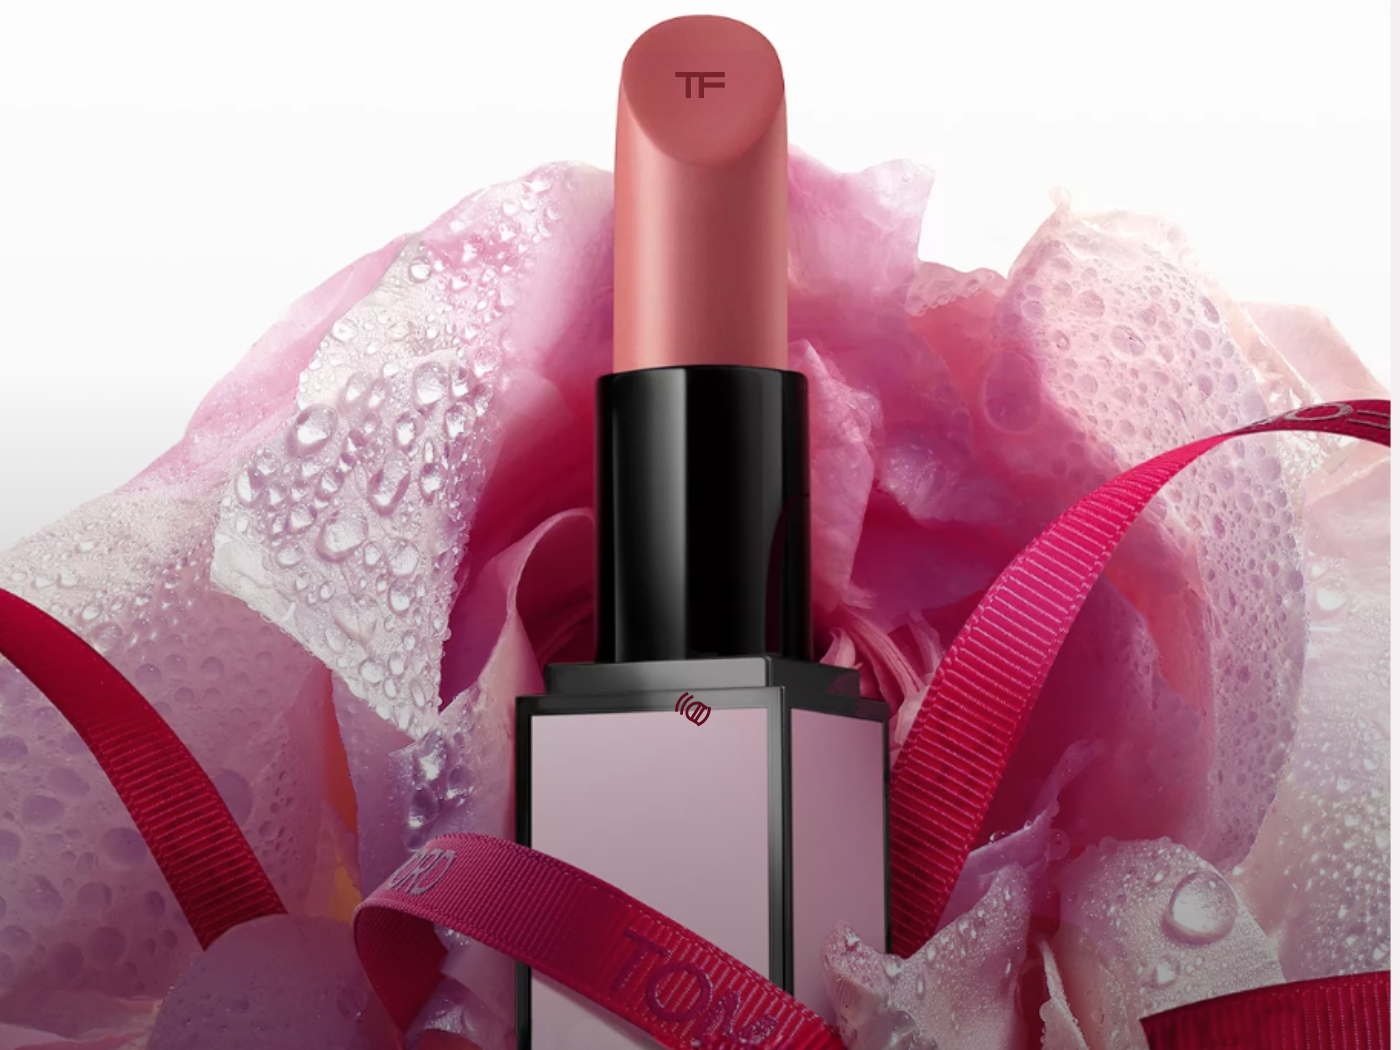 Tom Ford pink lipstick for breast cancer awareness